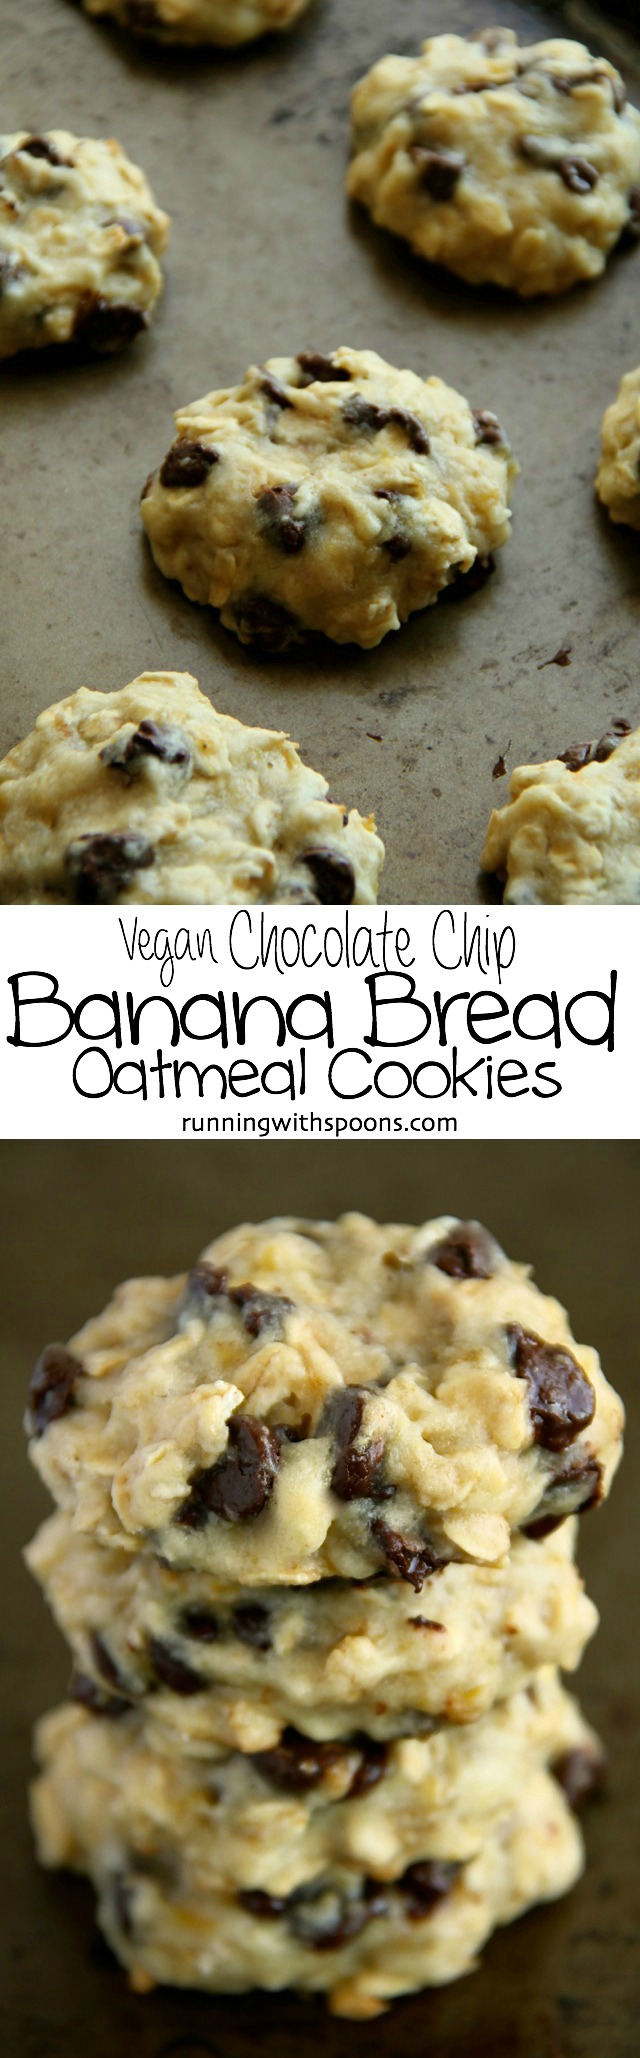 Vegan Chocolate Chip Banana Bread Oatmeal Cookies -- deliciously soft and chewy cookies that contain NO eggs or butter! || runningwithspoons.com #vegan #healthy